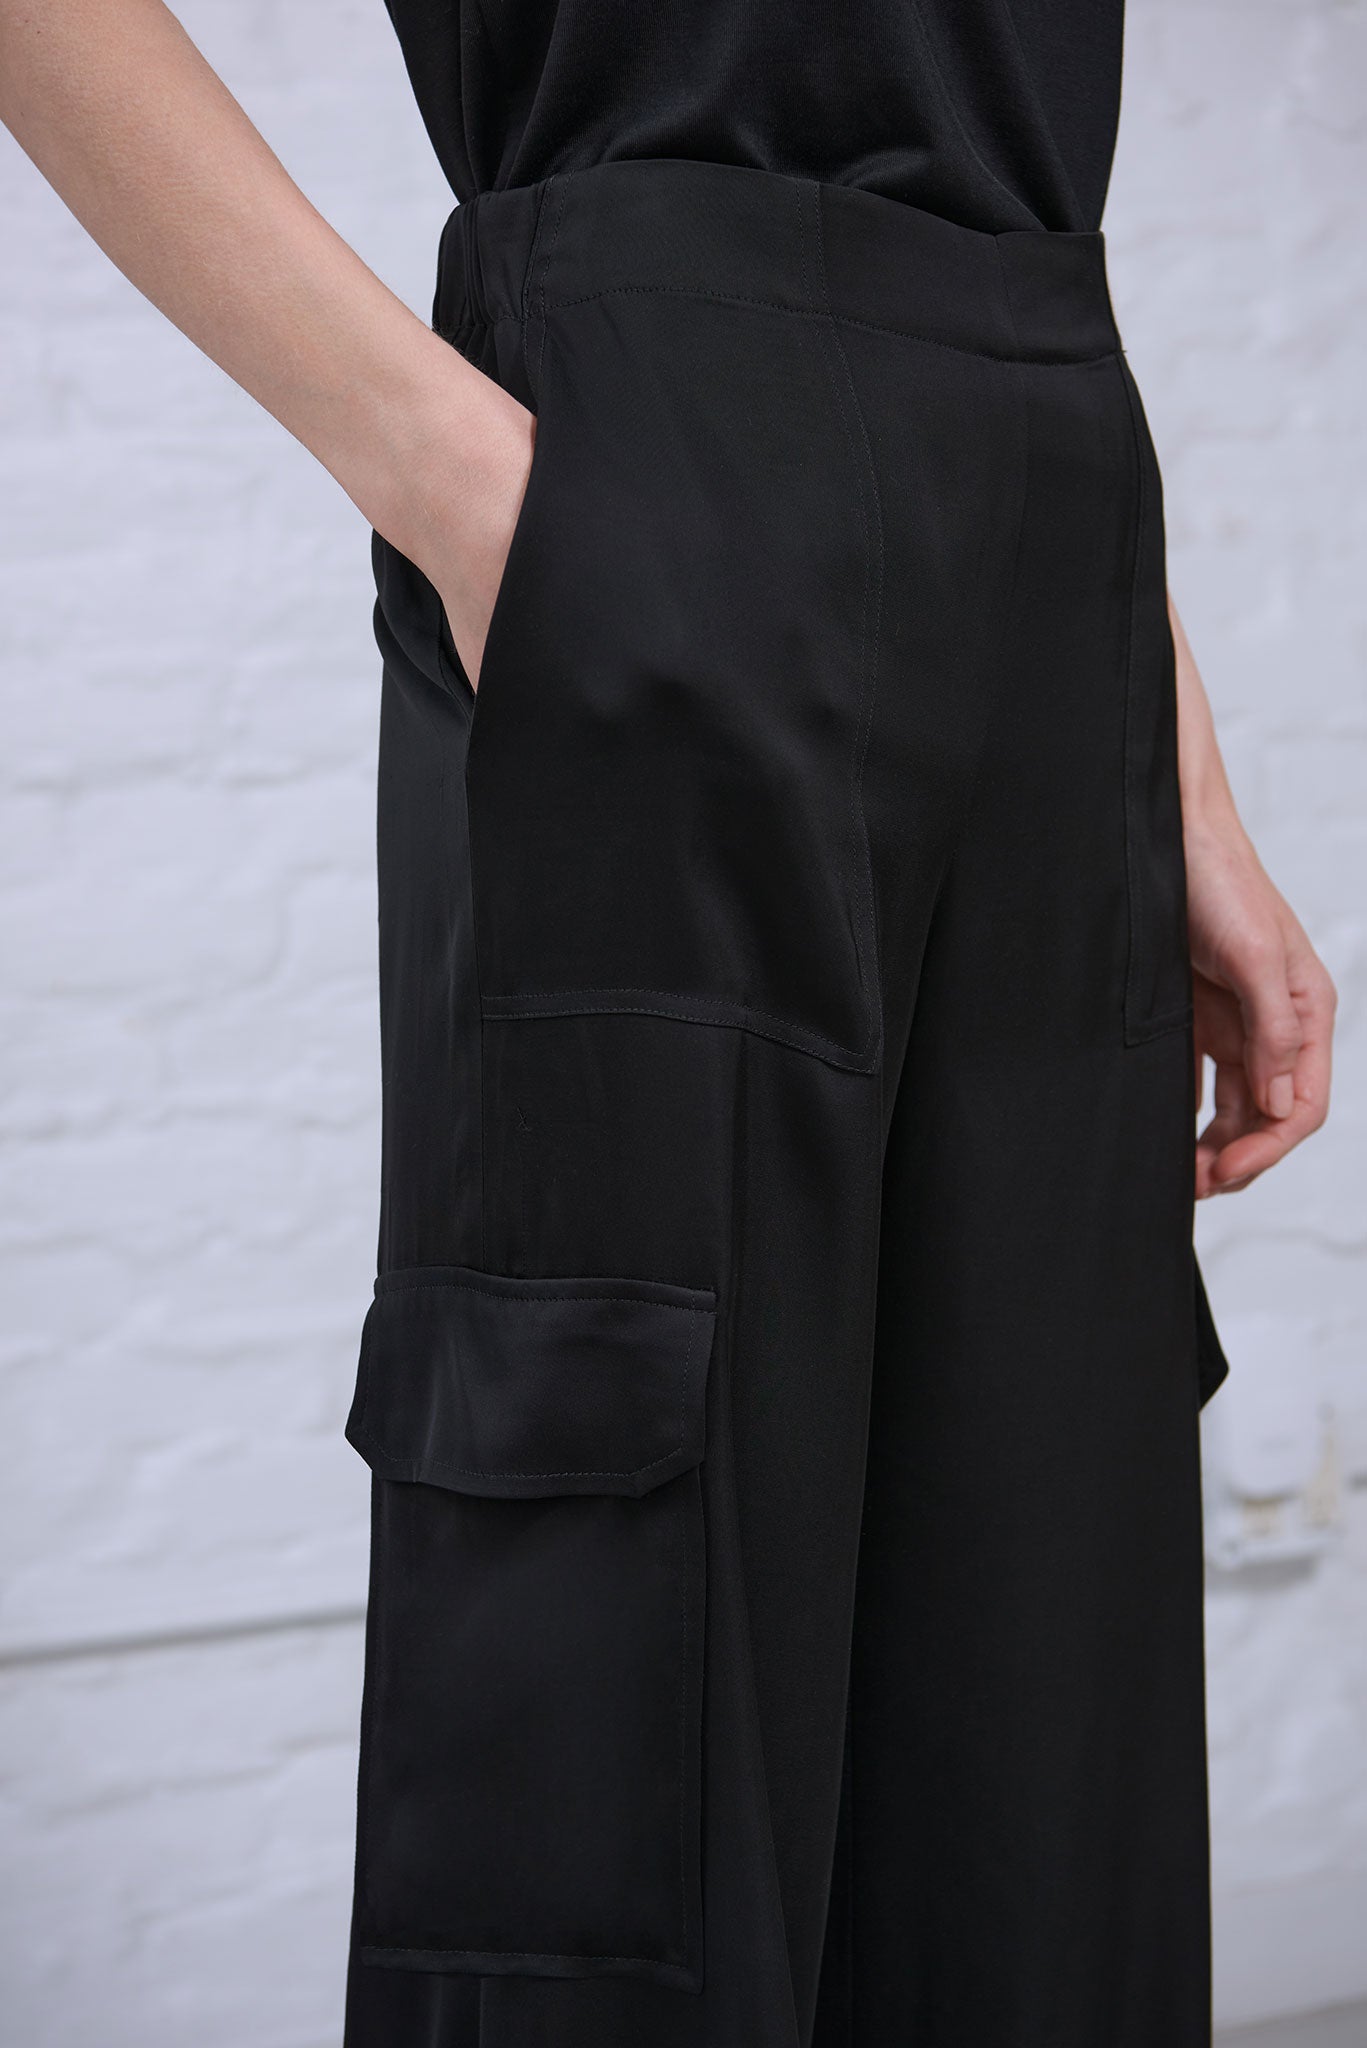 Women's black satin cargo pant with pockets